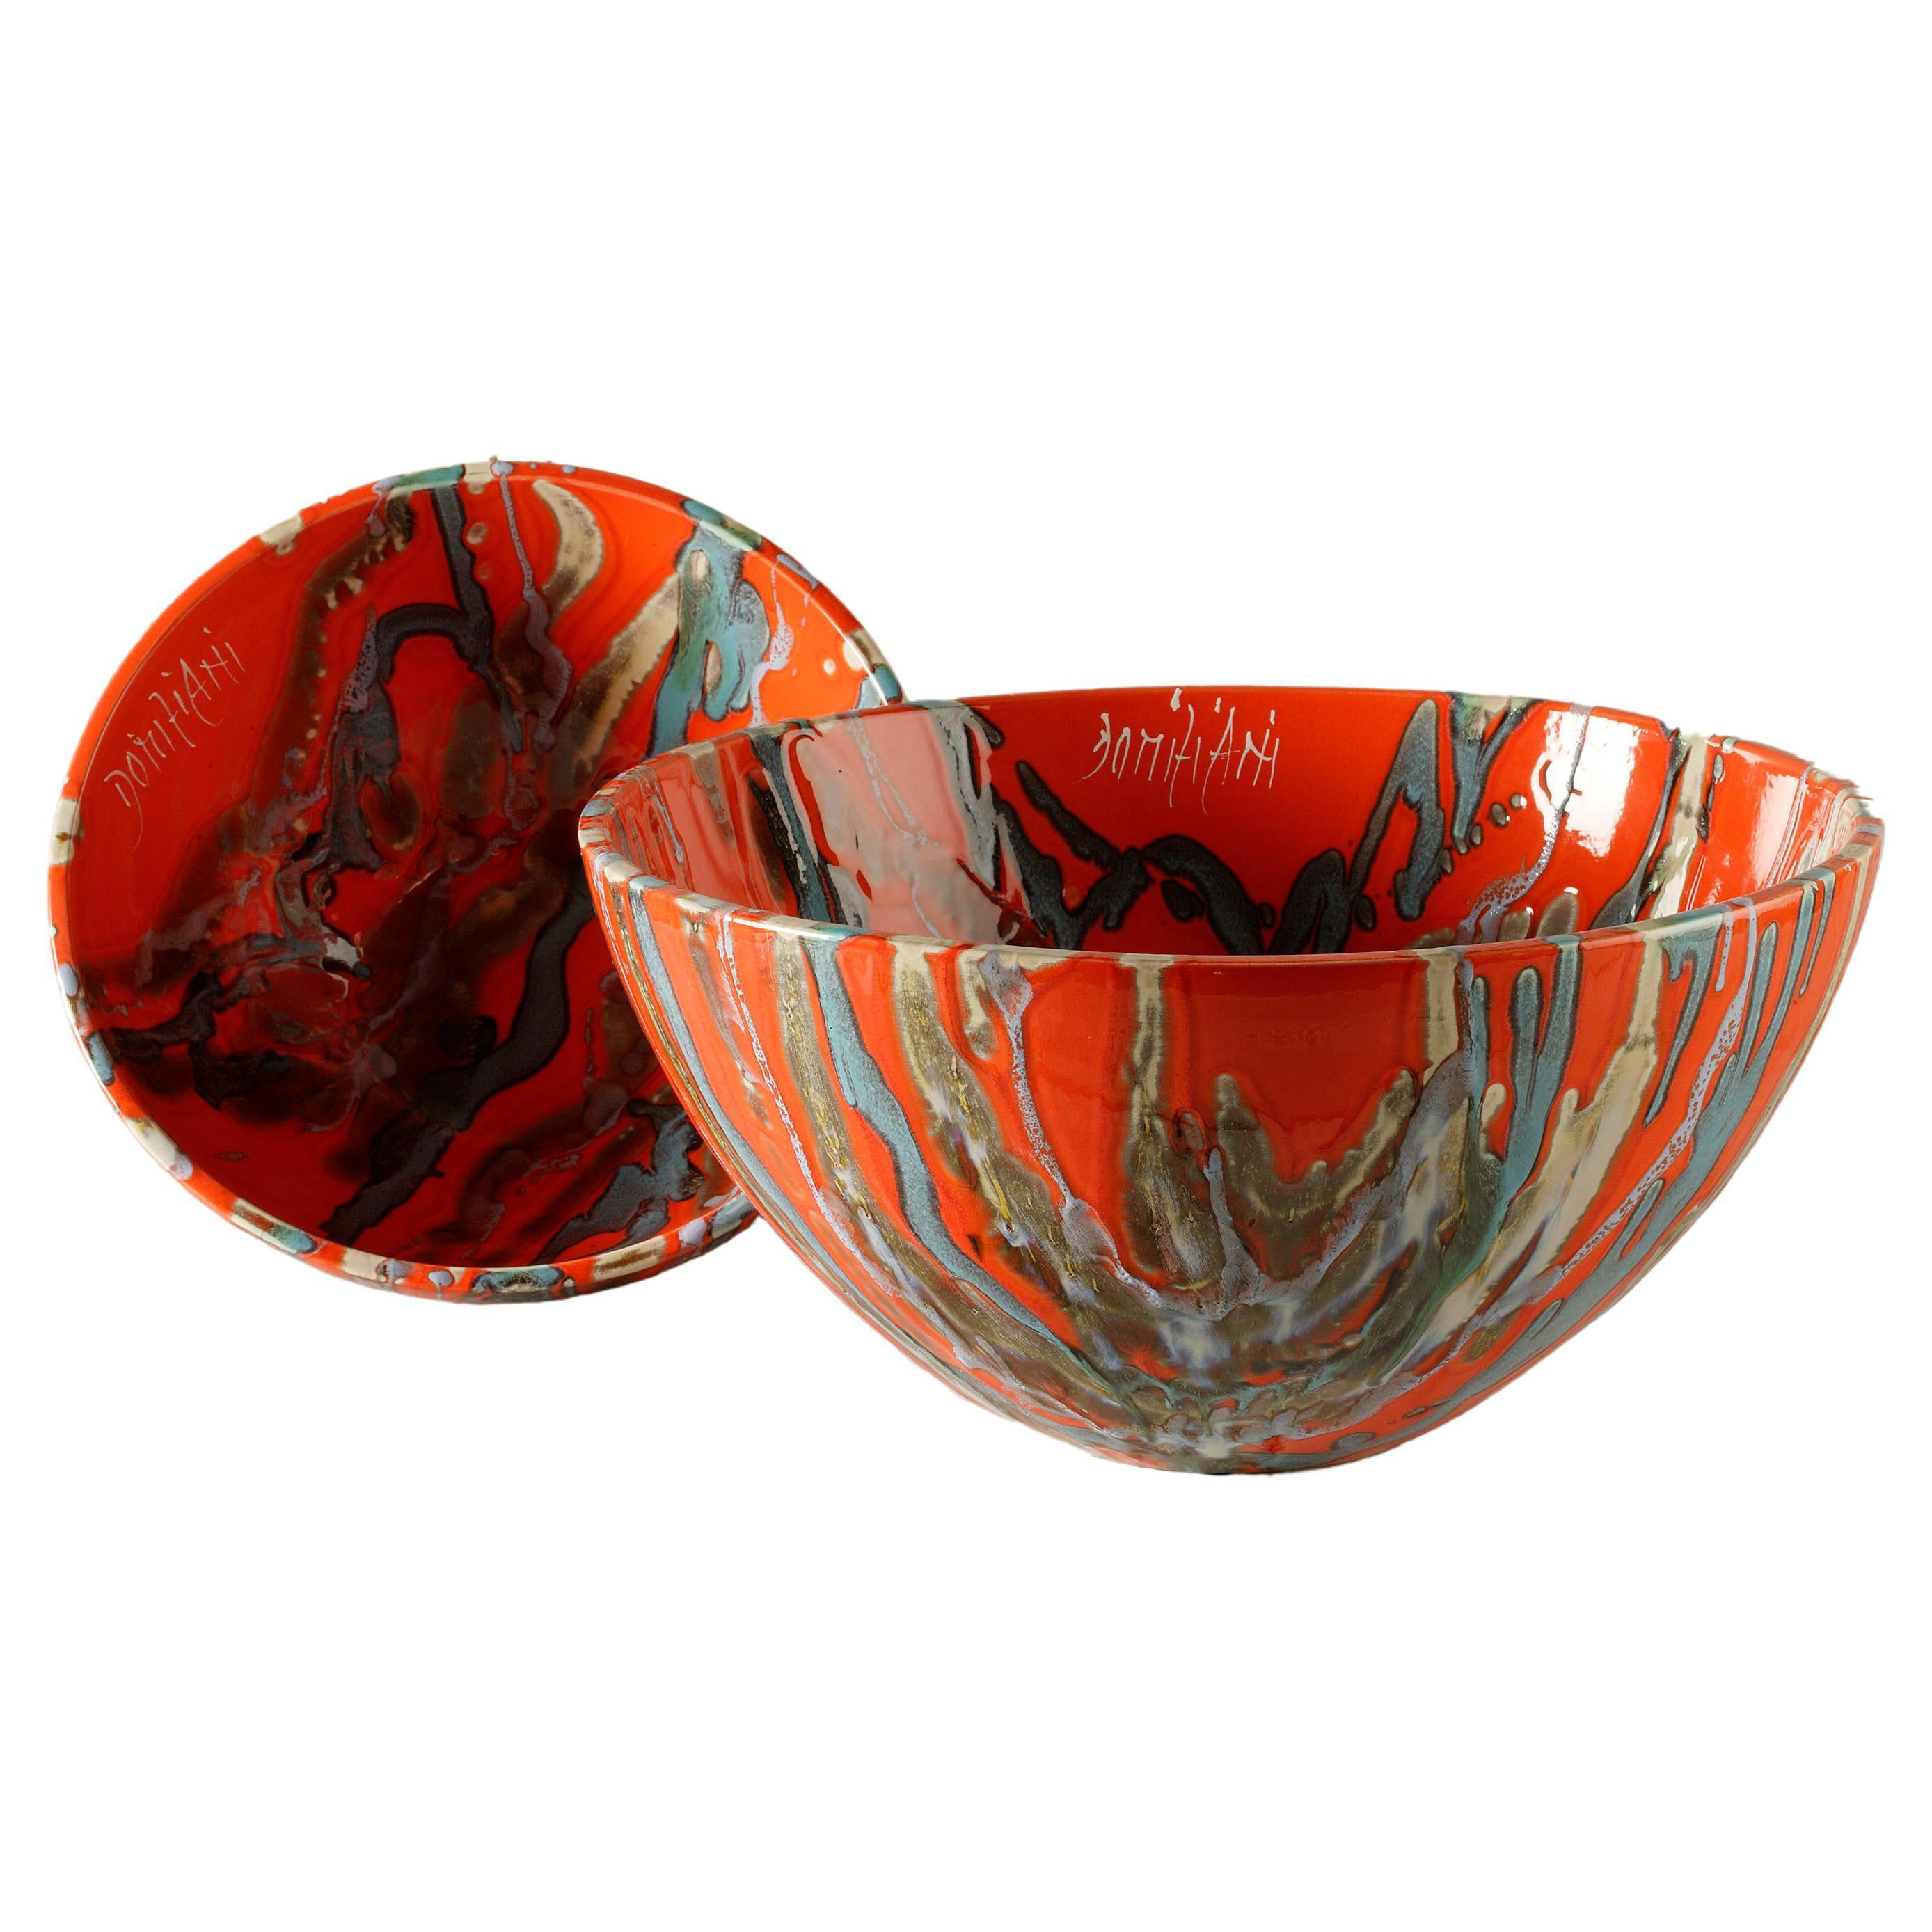 Ceramic Salad Bowl, Ø 35cm x H 17cm Handmade in Italy 2021, Choose Your Pattern For Sale